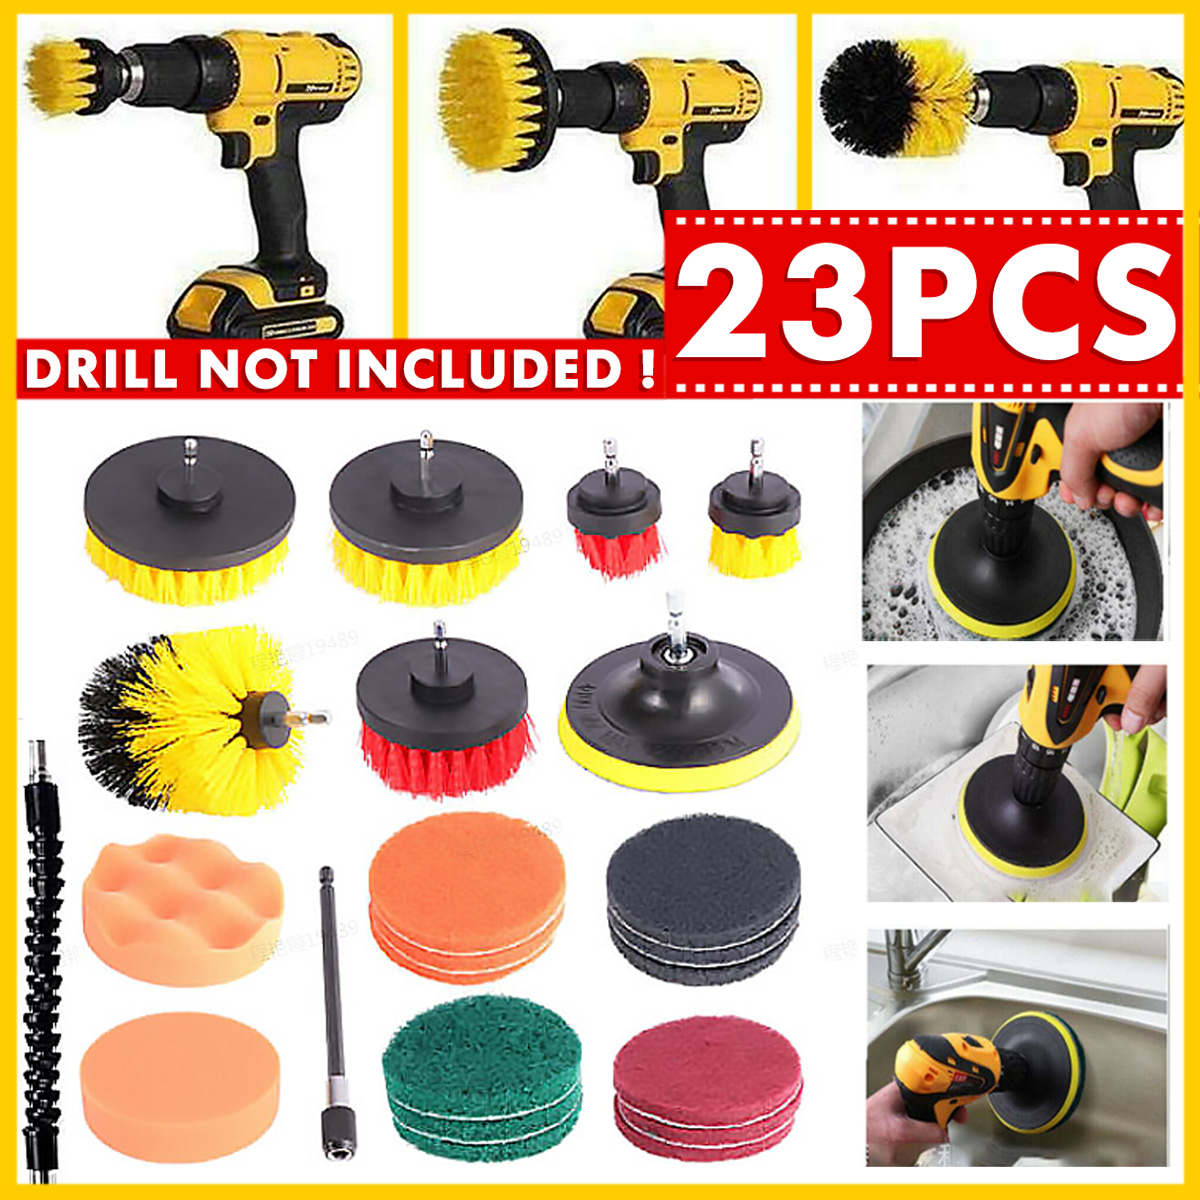 23pcs-Cleaning-Drill-Brush-Cleaner-Combo-Tool-Kit-Electric-Drill-Power-Scrubber-1746489-1